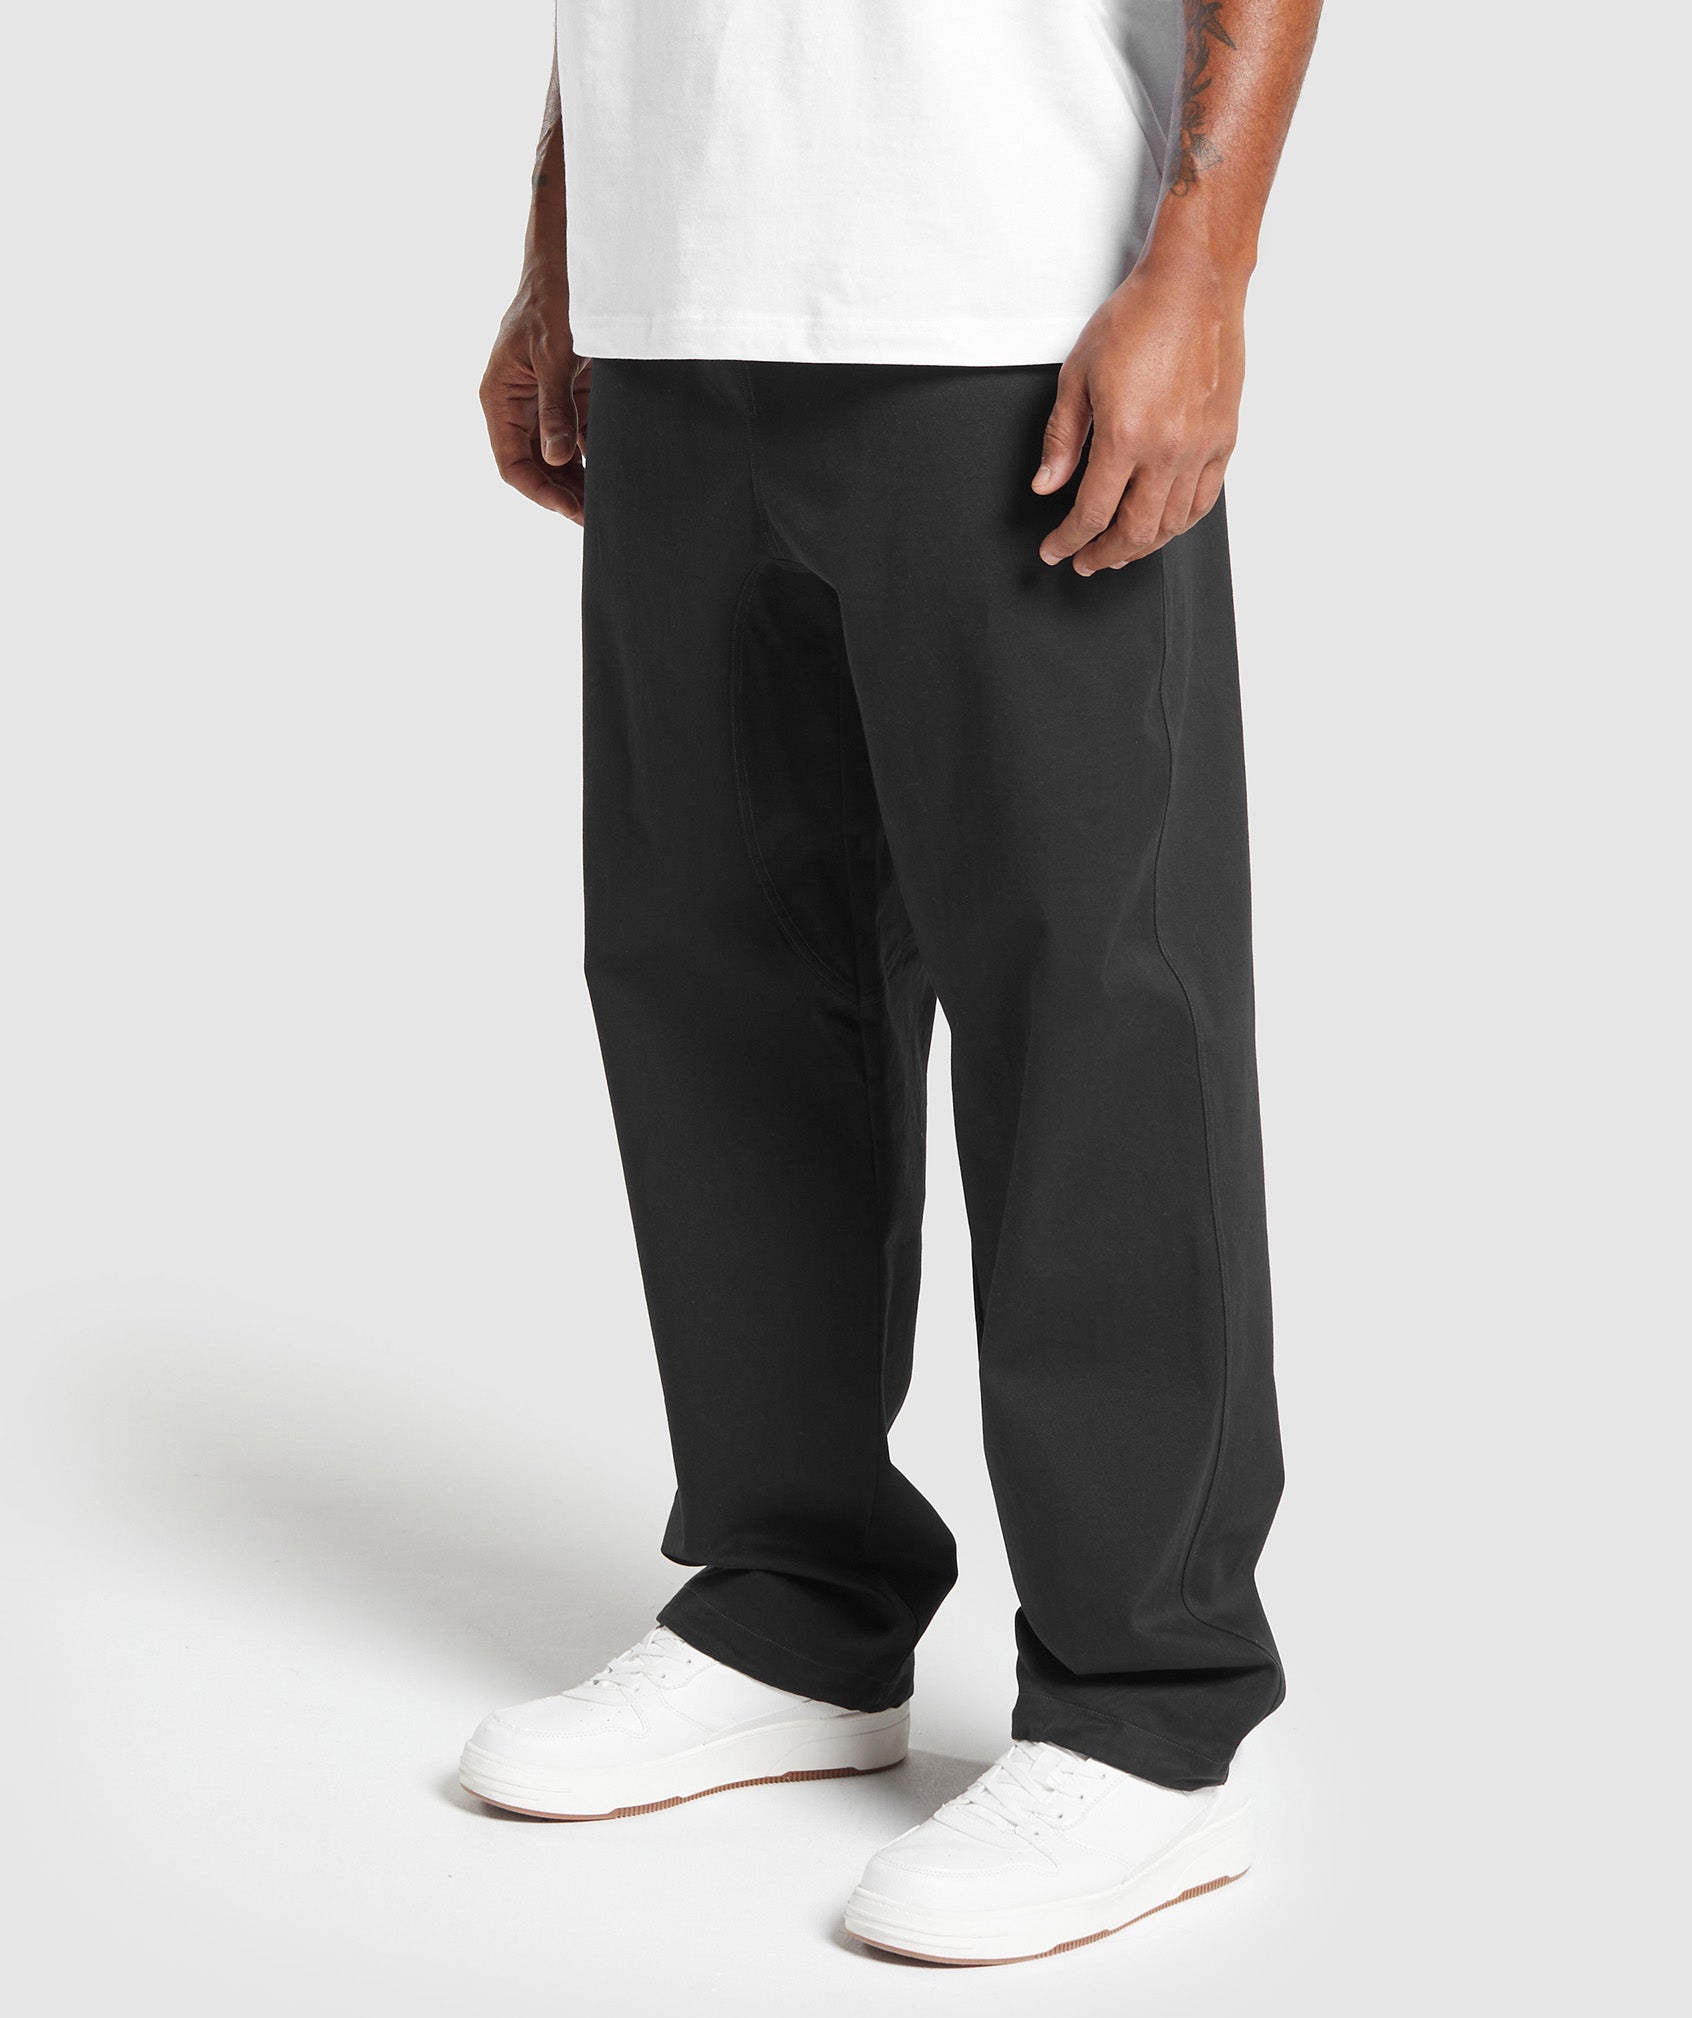 Rest Day Woven Oversized Joggers in Black - view 3